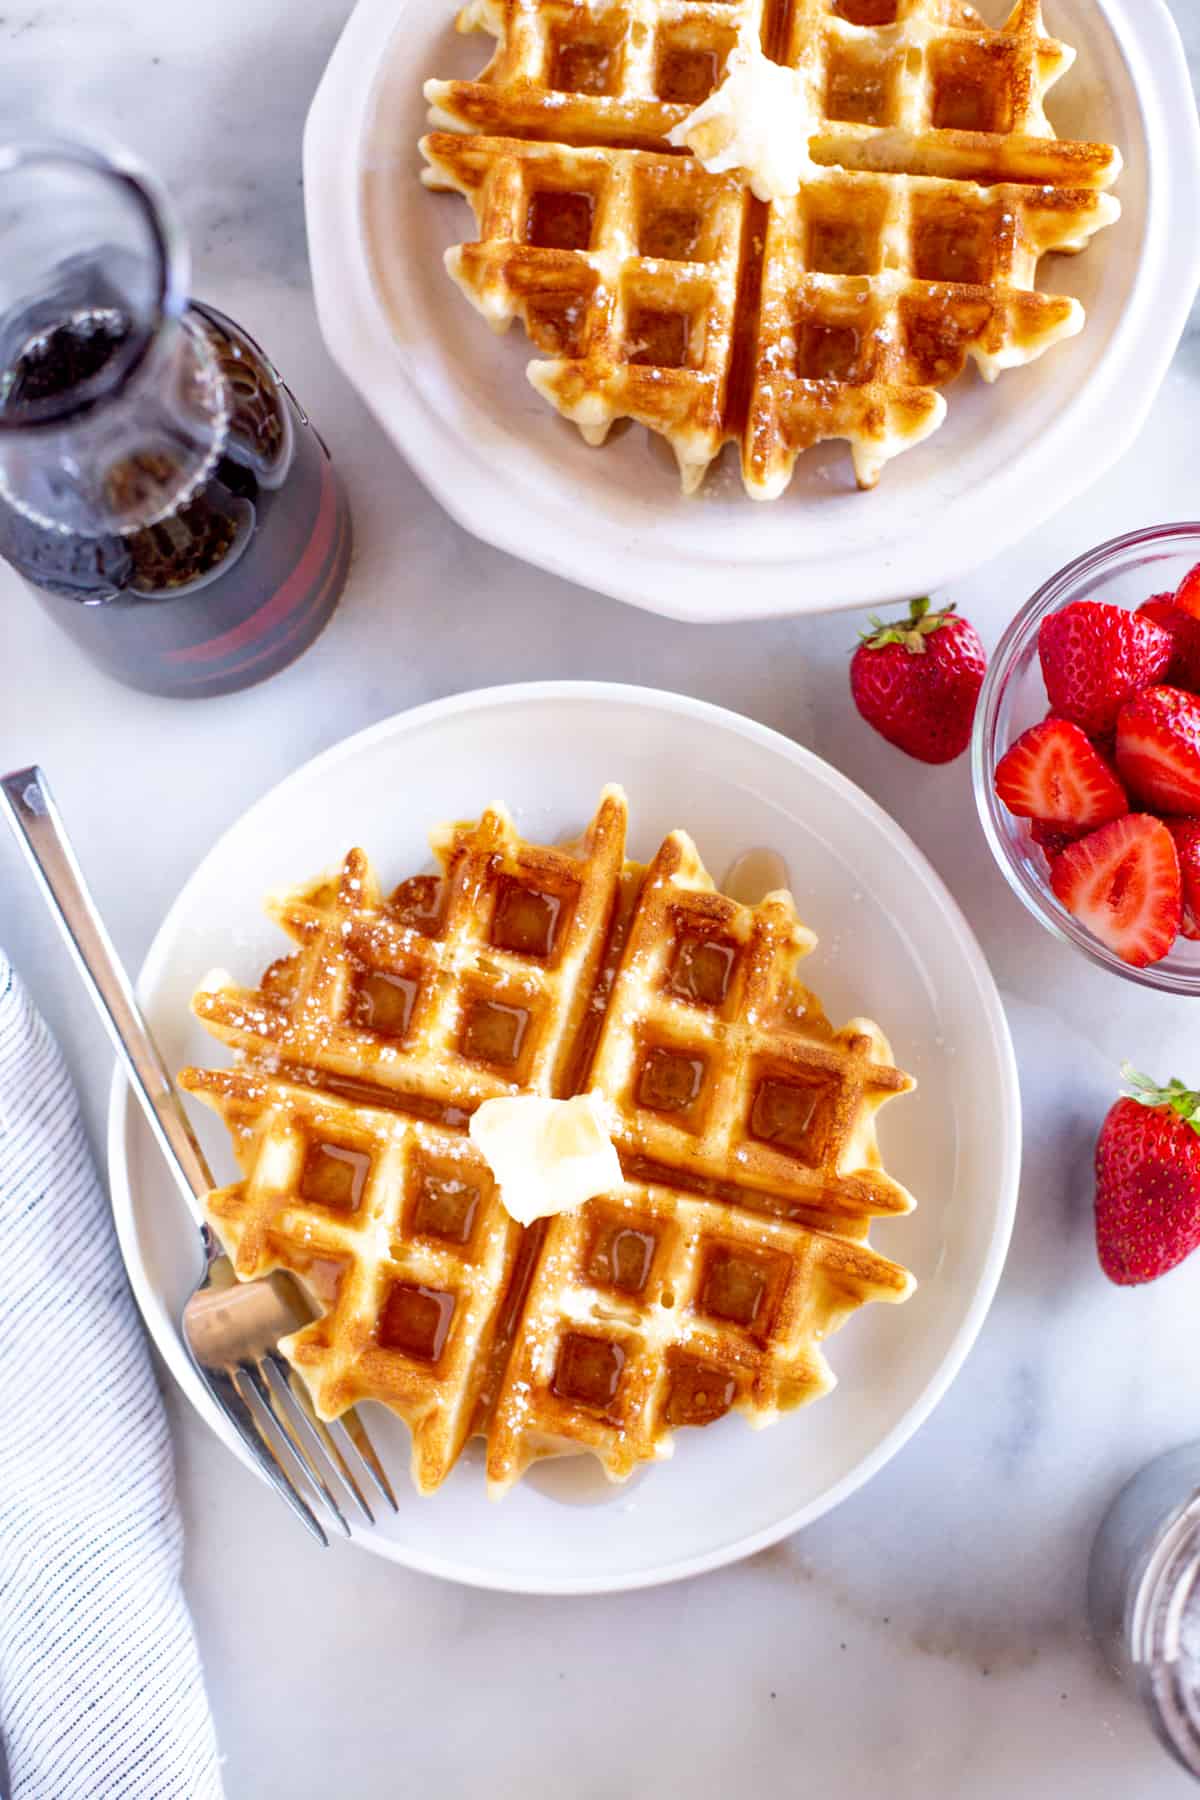 Belgian waffles on plates with butter, syrup, and powdered sugar next to a bowl of strawberries.